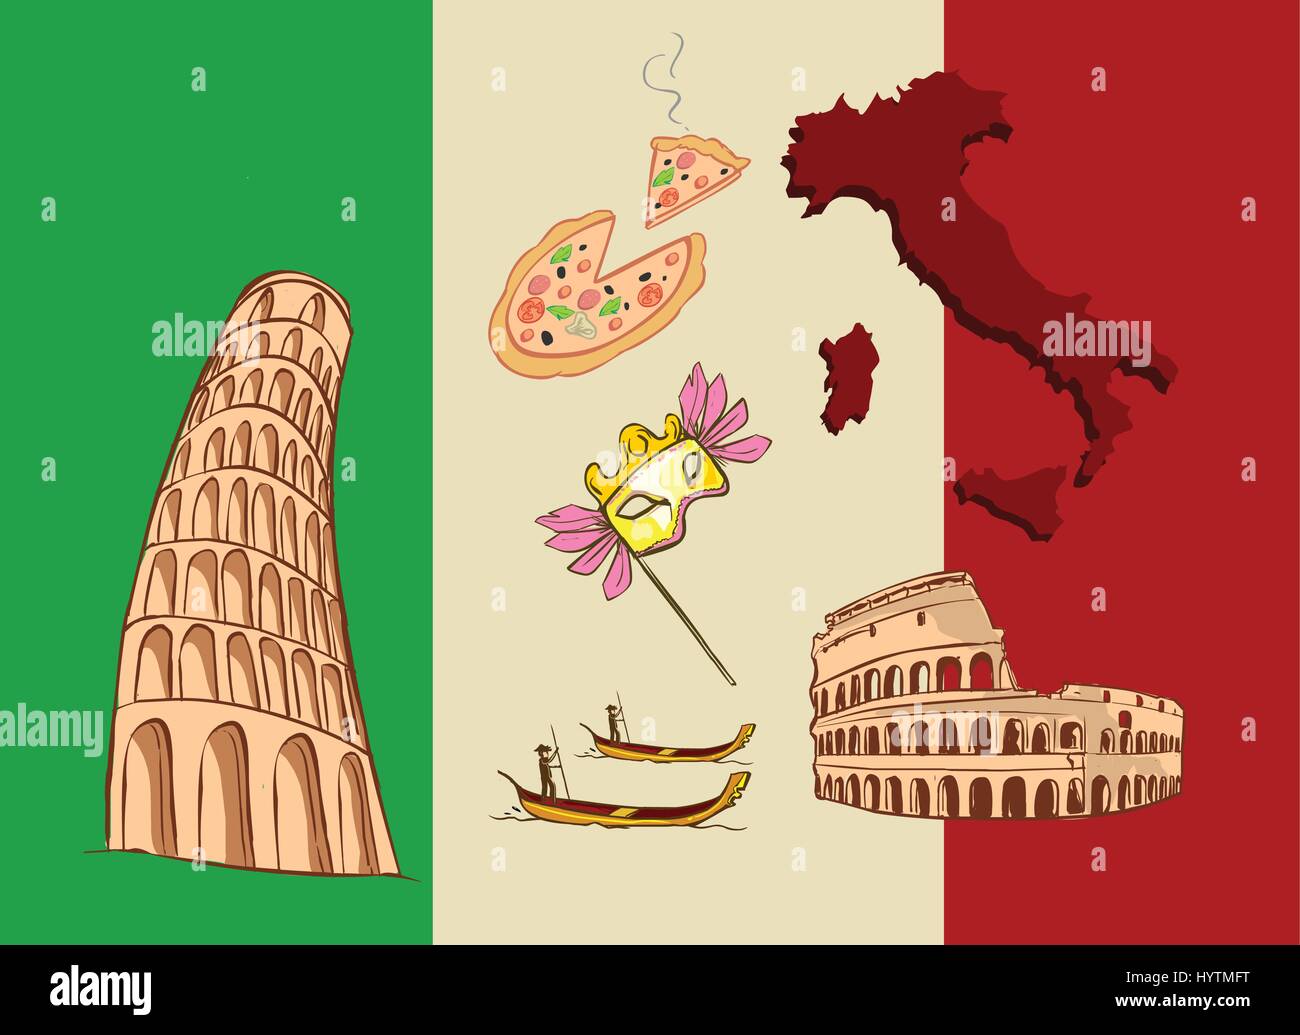 vector illustration of a Italy icon Stock Vector